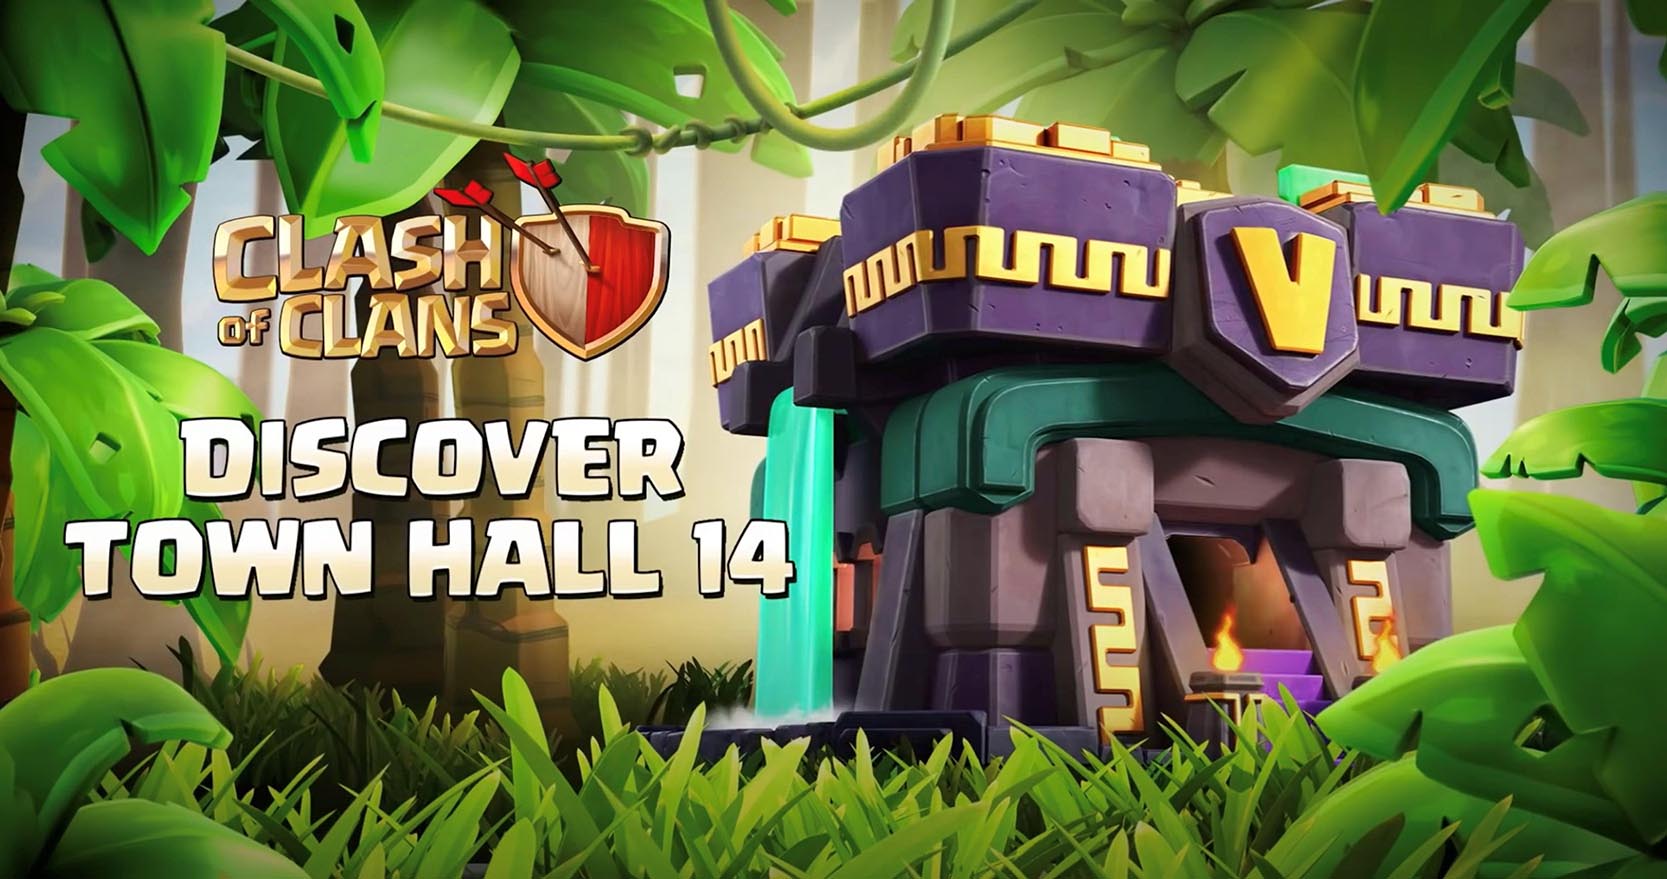 Get Ready for Clash of Clans Spring 2021 Update Town Hall 14 is on the way!